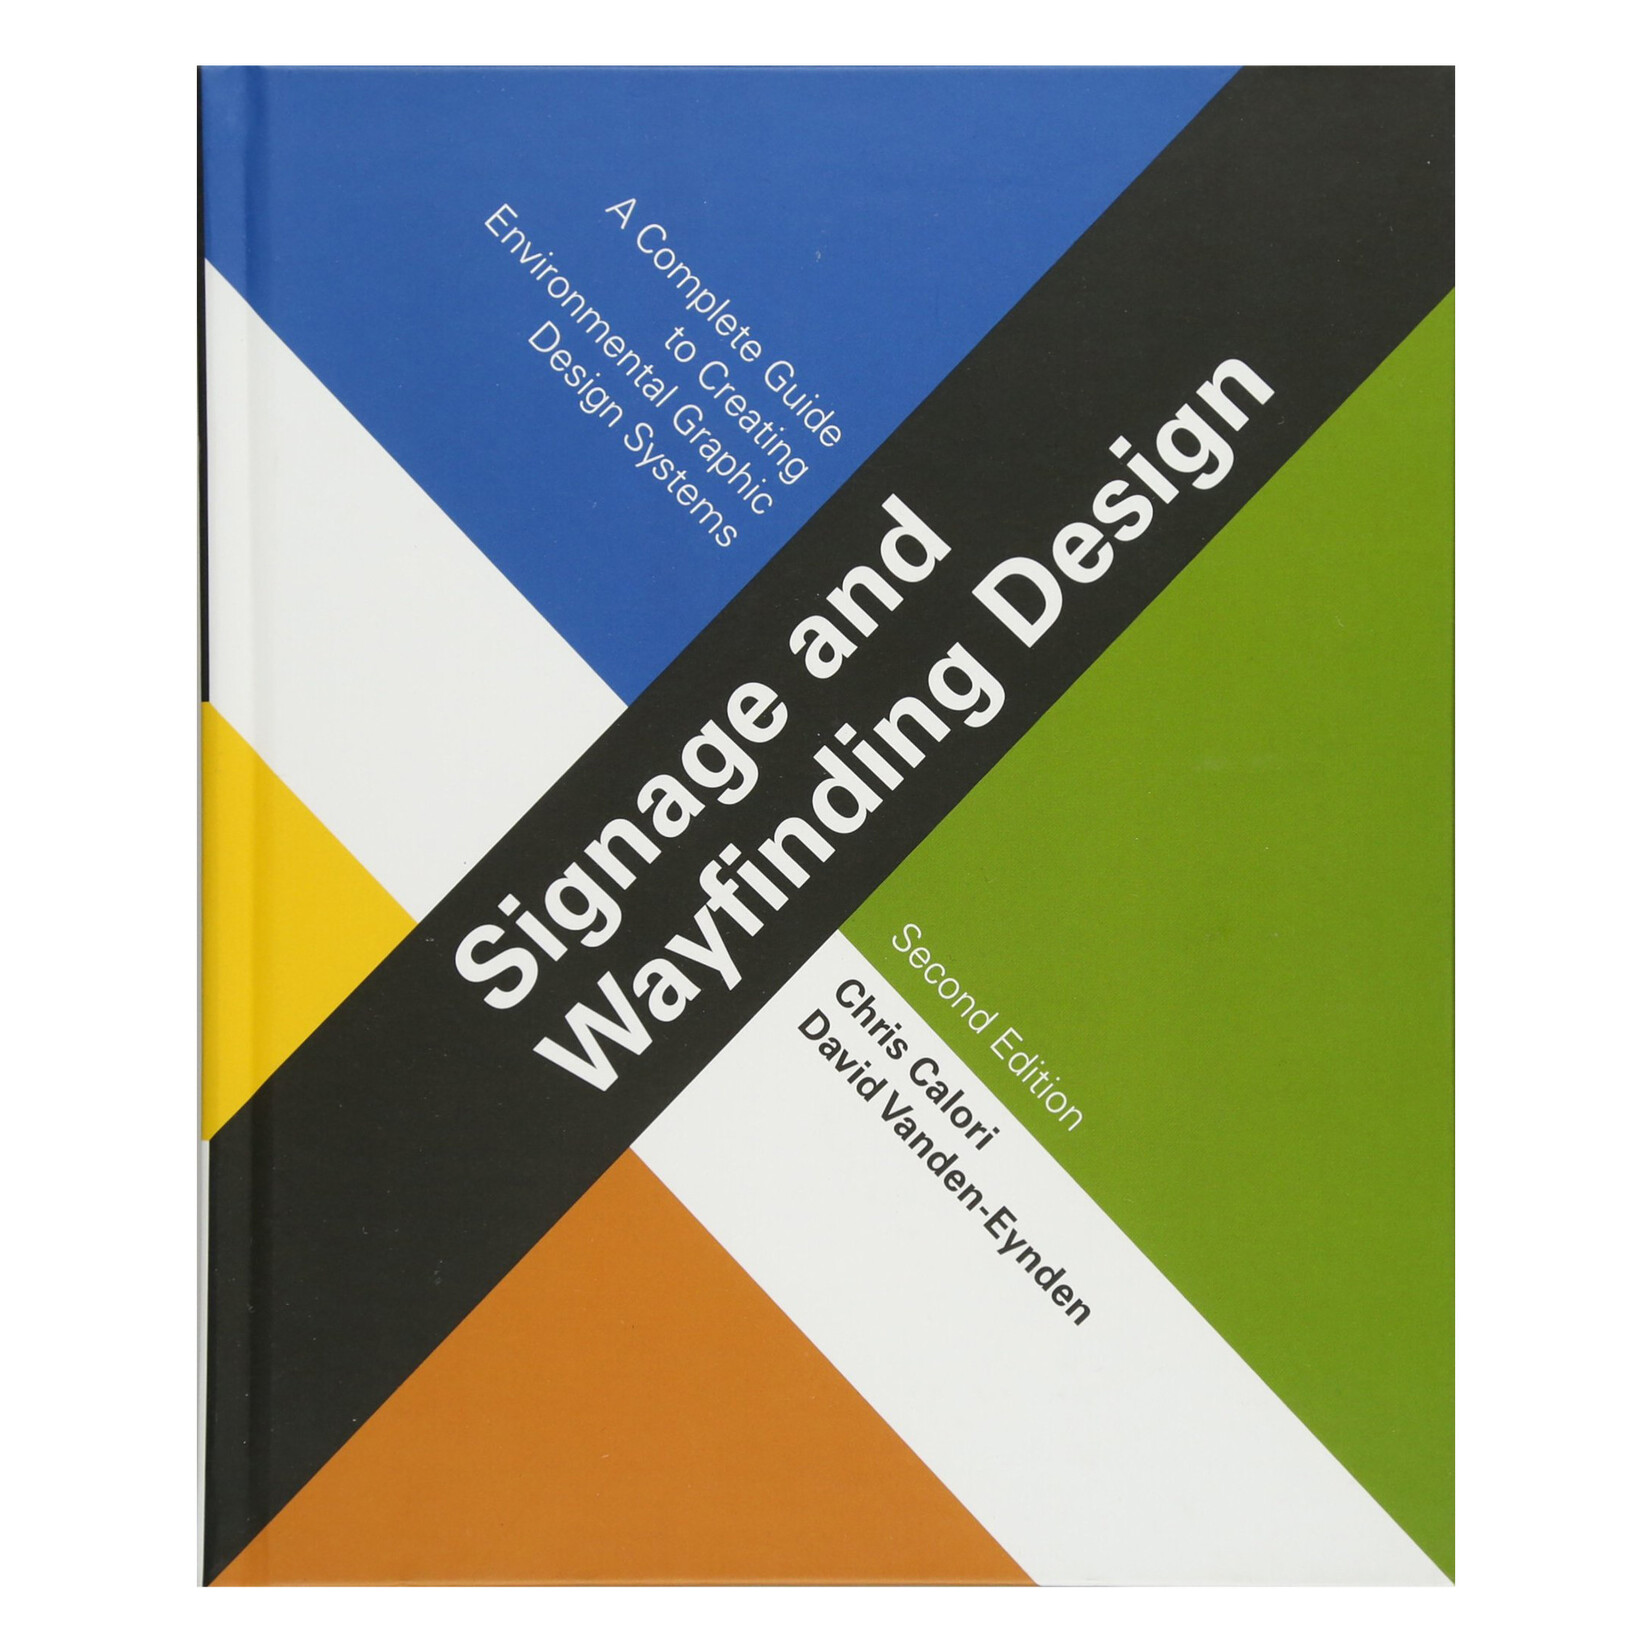 Signage and Wayfinding Design: Complete Guide to Creating Environmental Graphic Design Systems, 2nd Ed.